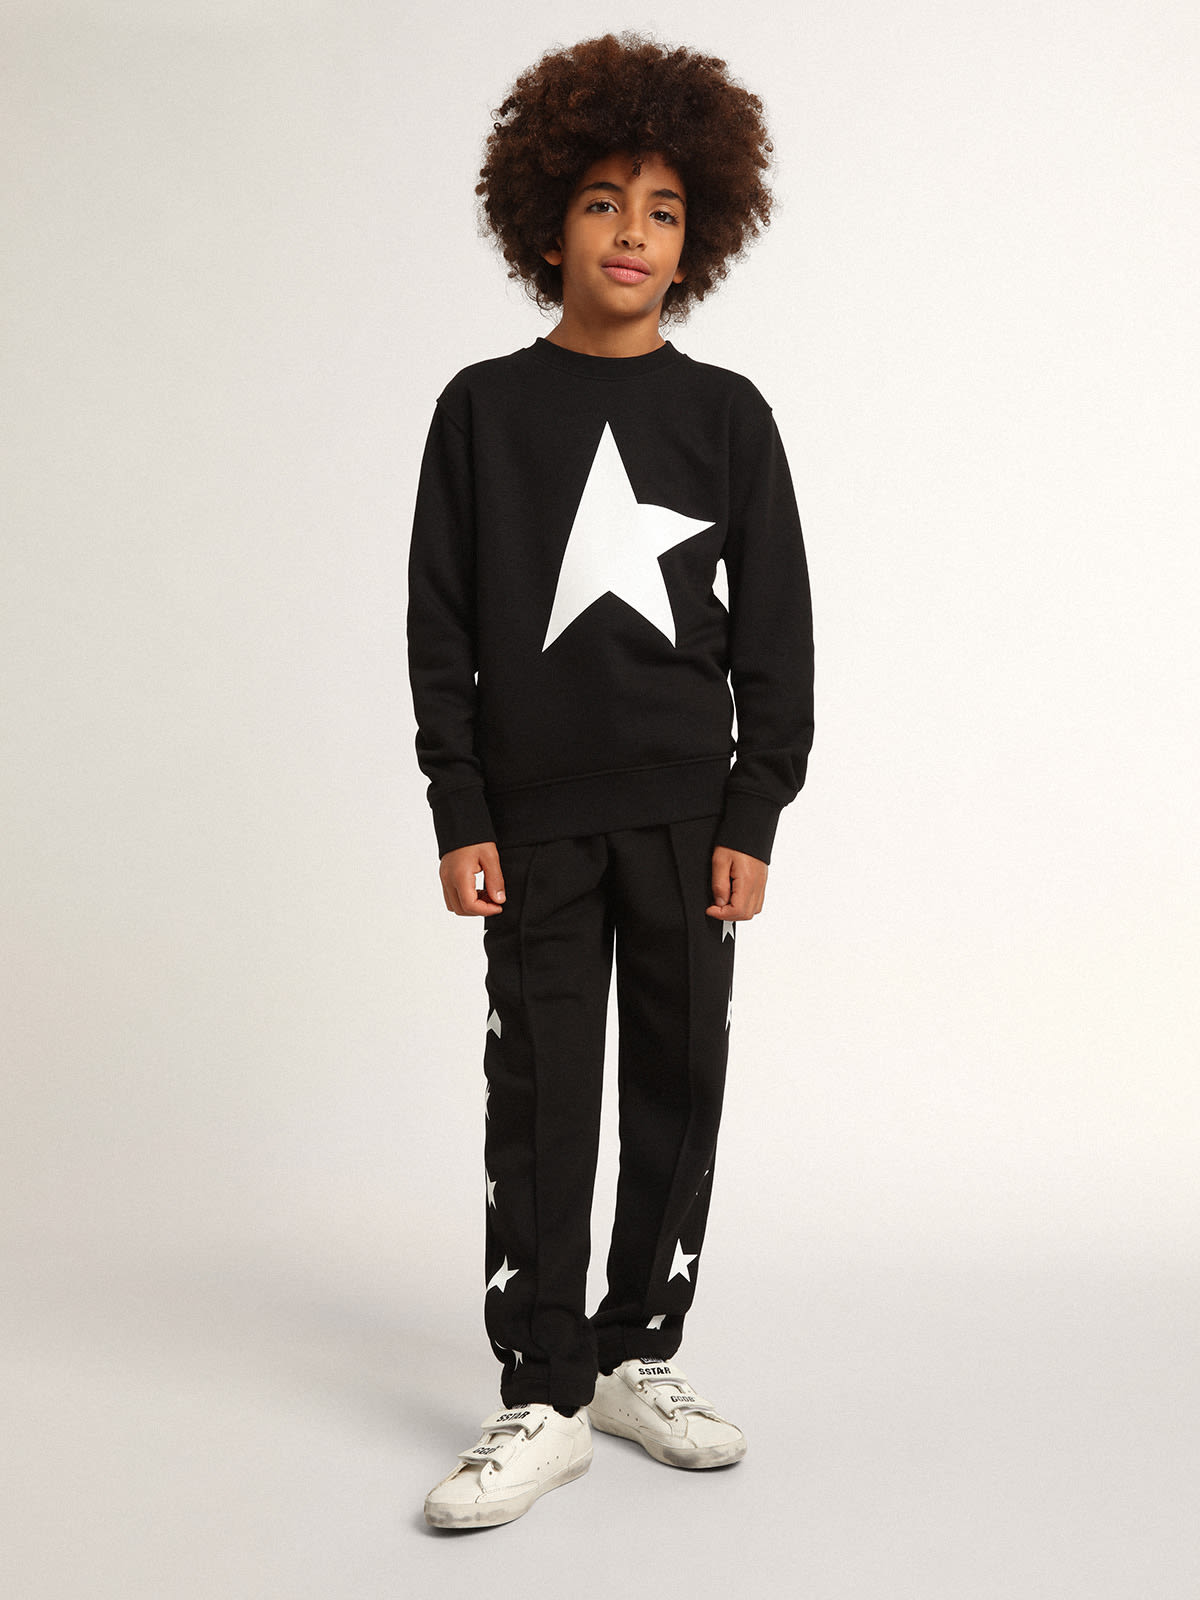 Golden Goose - Black Star Collection sweatshirt with white maxi star on the front in 